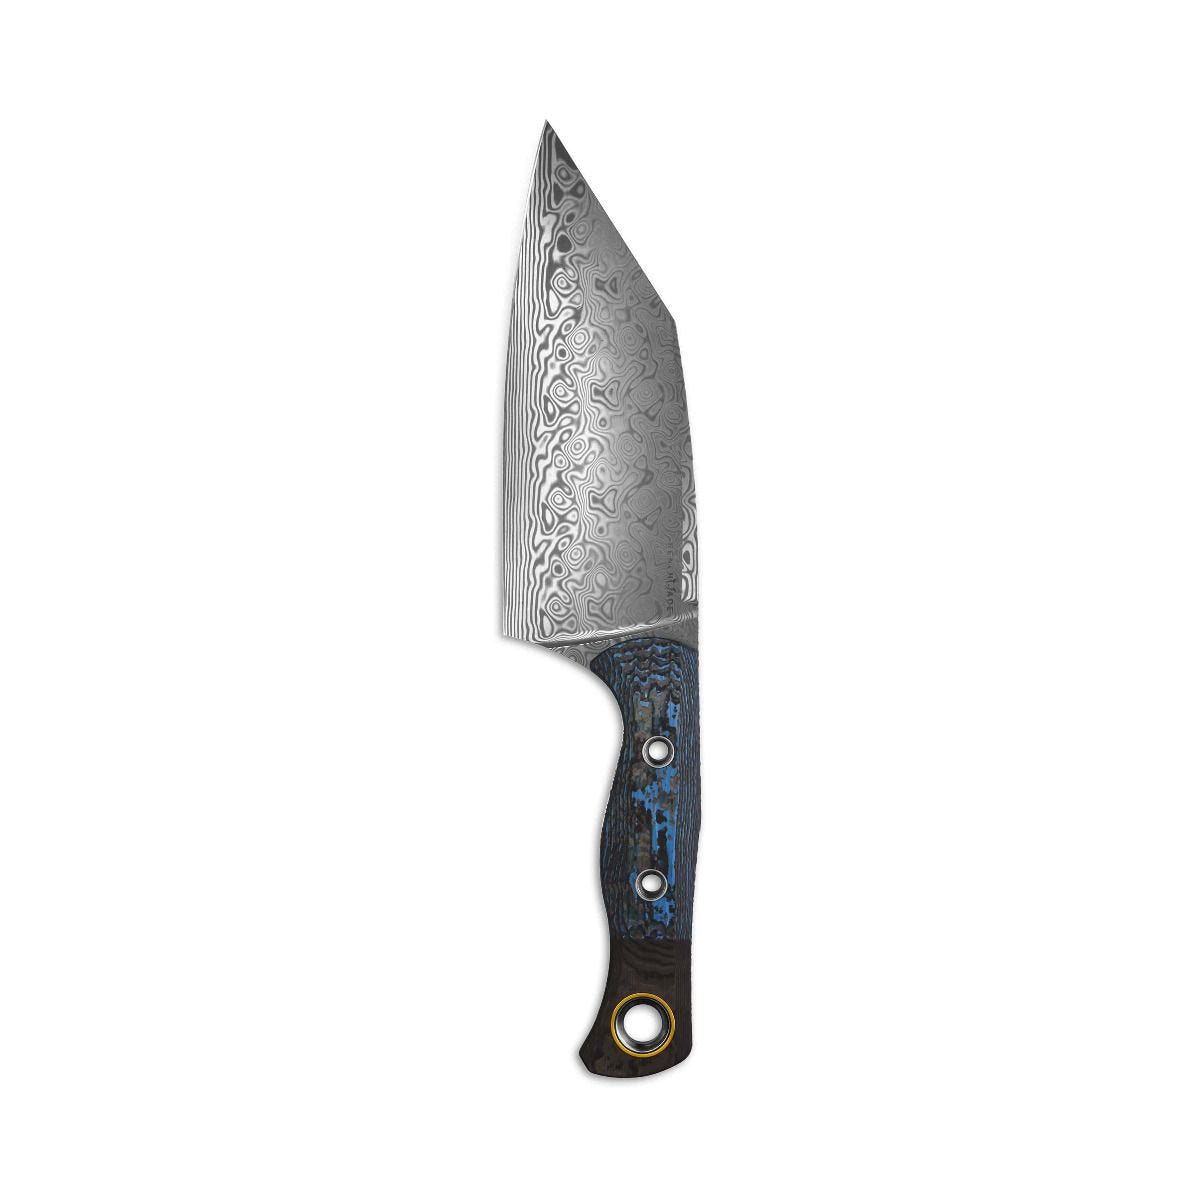 Benchmade 4010-211 Collector's Edition Station Knife Arctic Storm product image